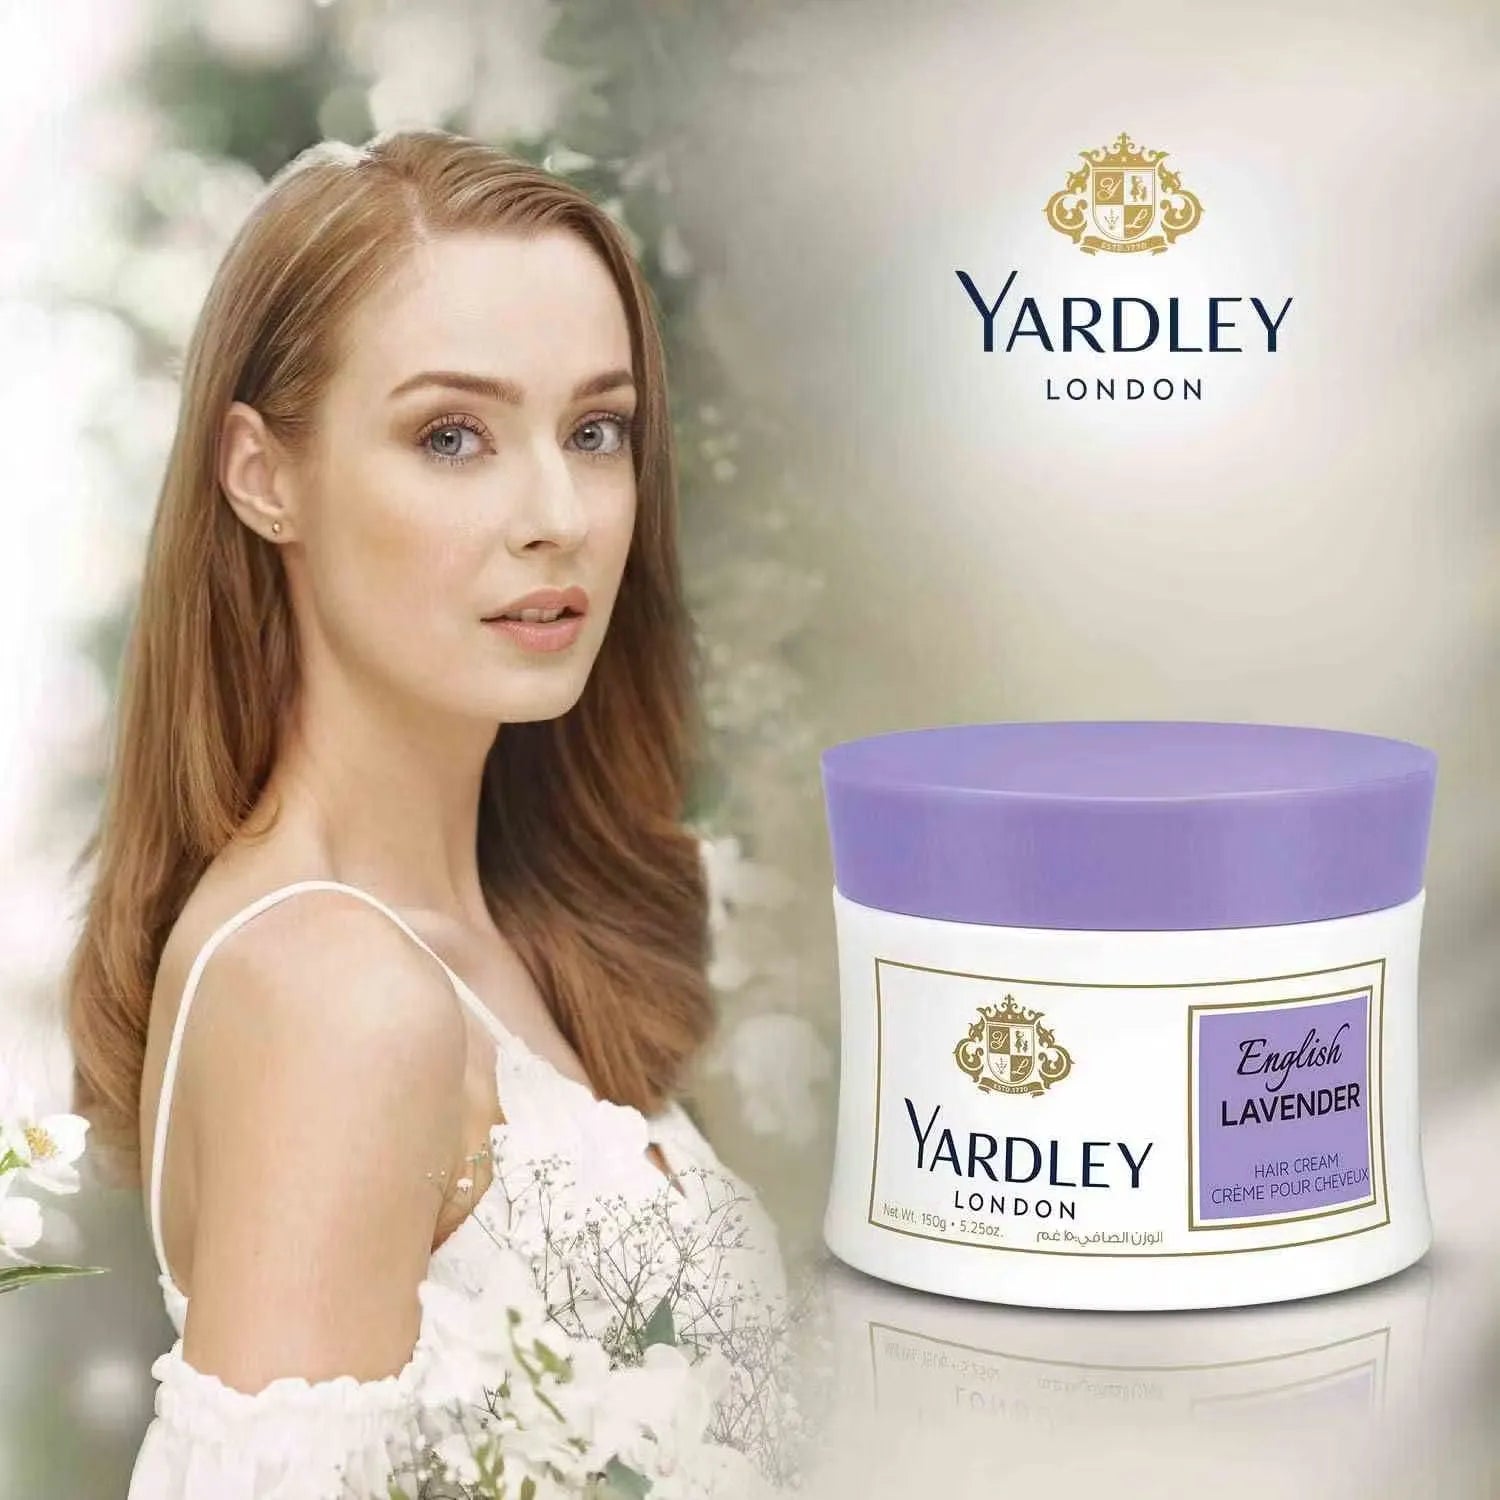 Yardley London Lavender Hair Cream (150g) nourishes and conditions hair, leaving it soft, manageable, and infused with a calming lavender scent. Shop on Dubailisit!